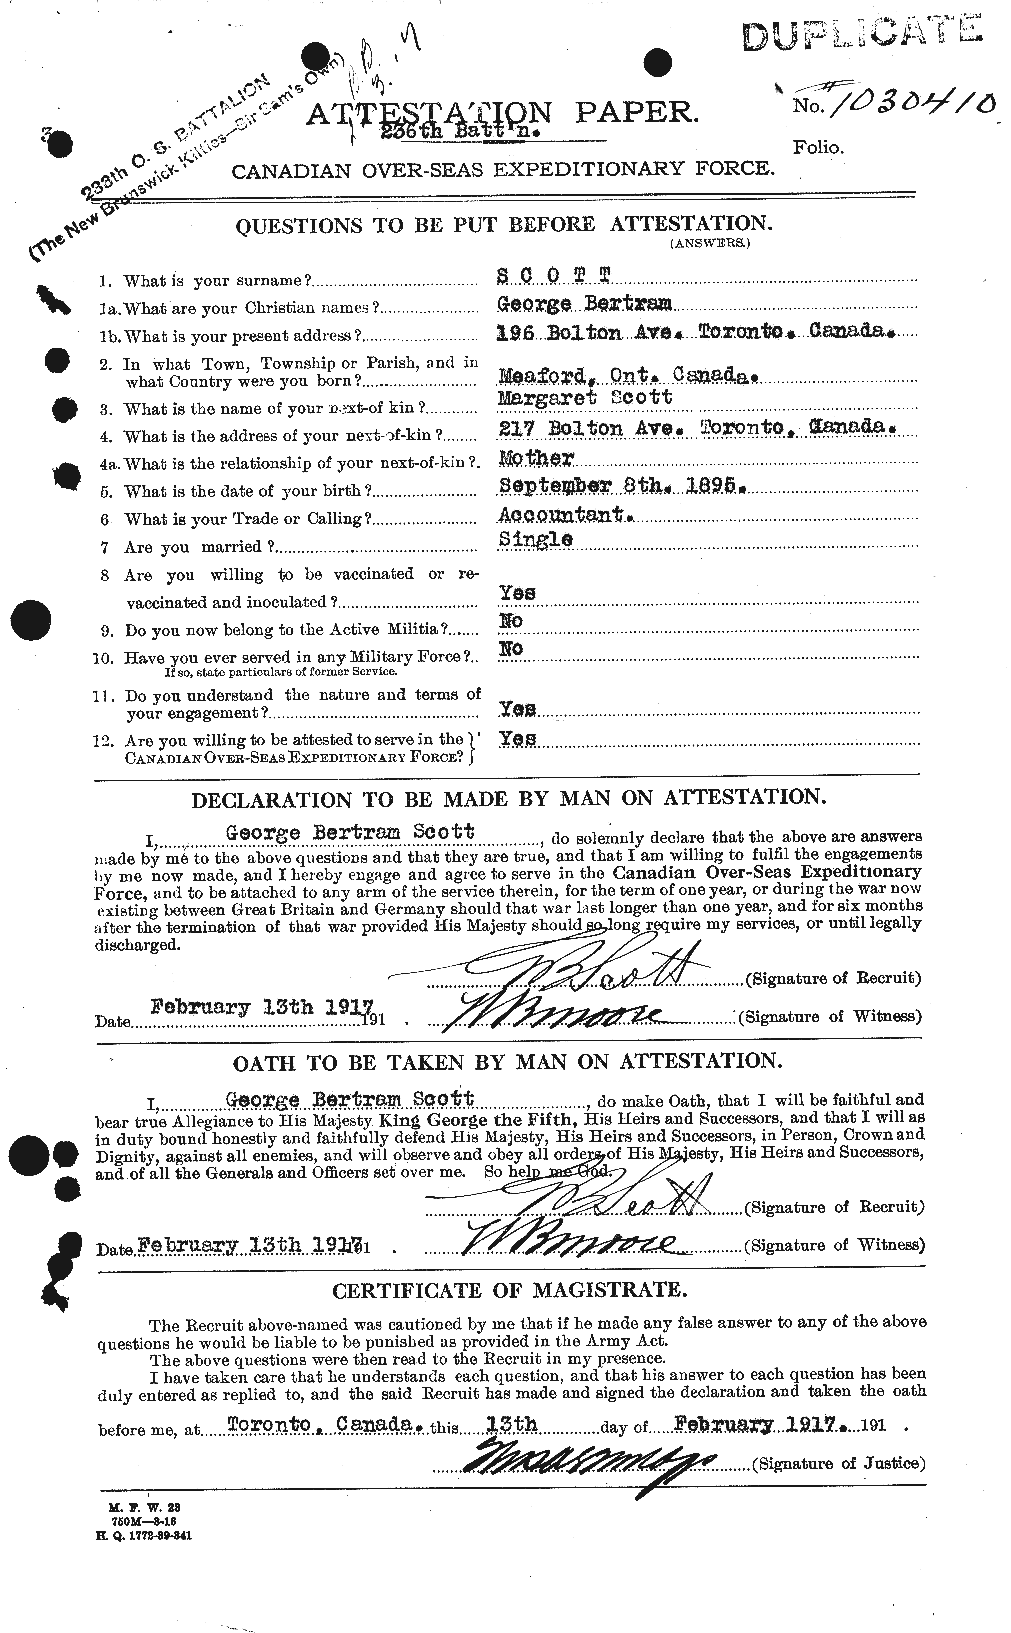 Personnel Records of the First World War - CEF 083569a